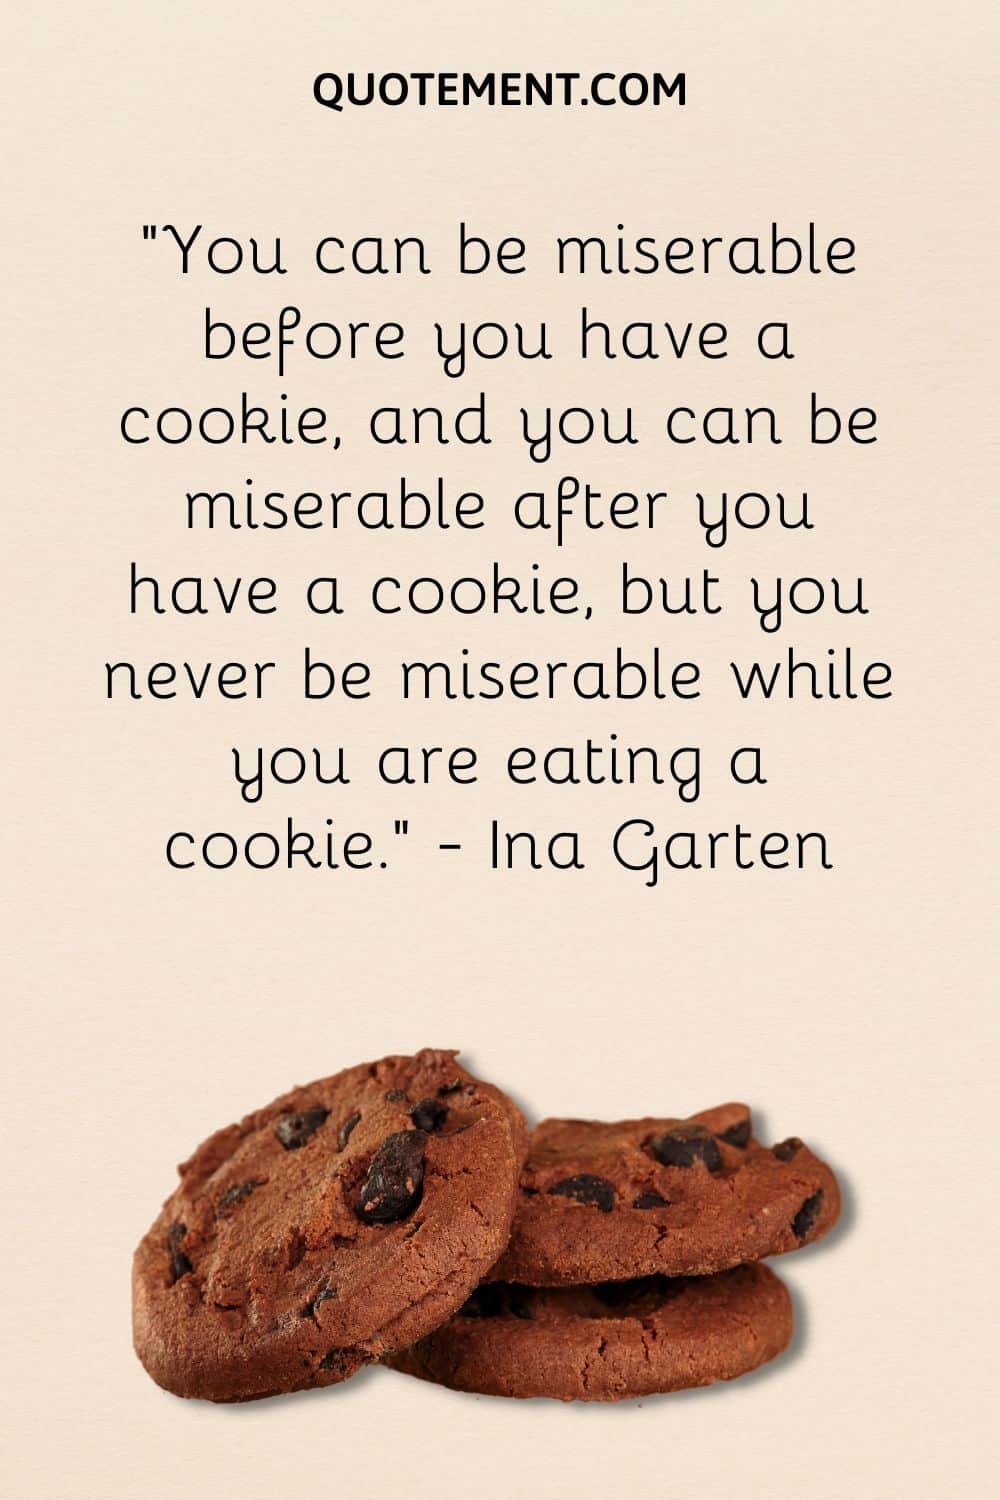 You can be miserable before you have a cookie